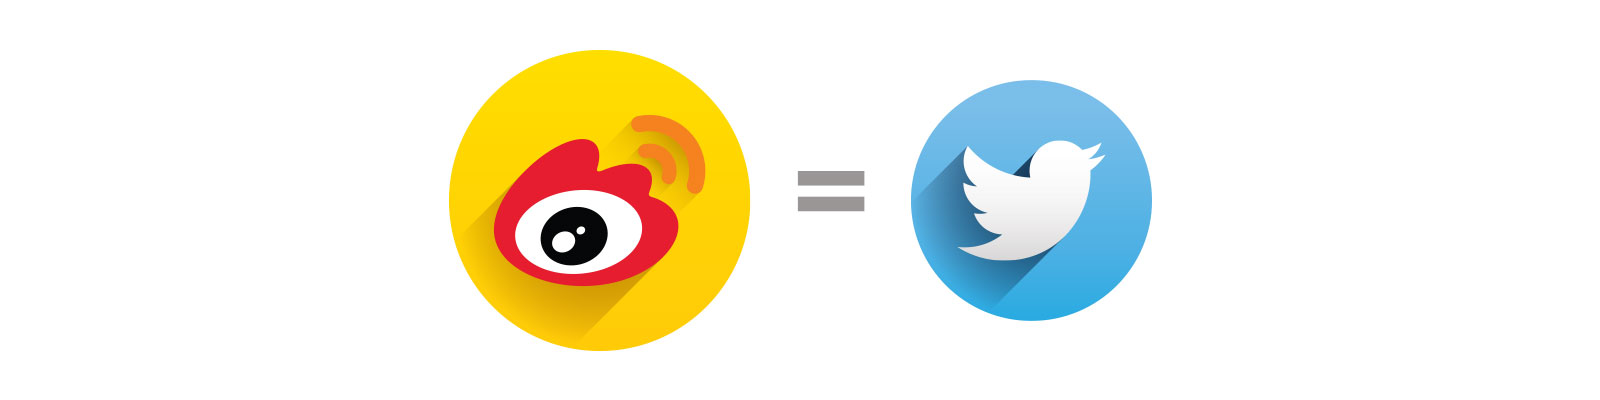 Sina Weibo is referred to as just ‘Weibo’— 
the Chinese word for ‘microblog.’